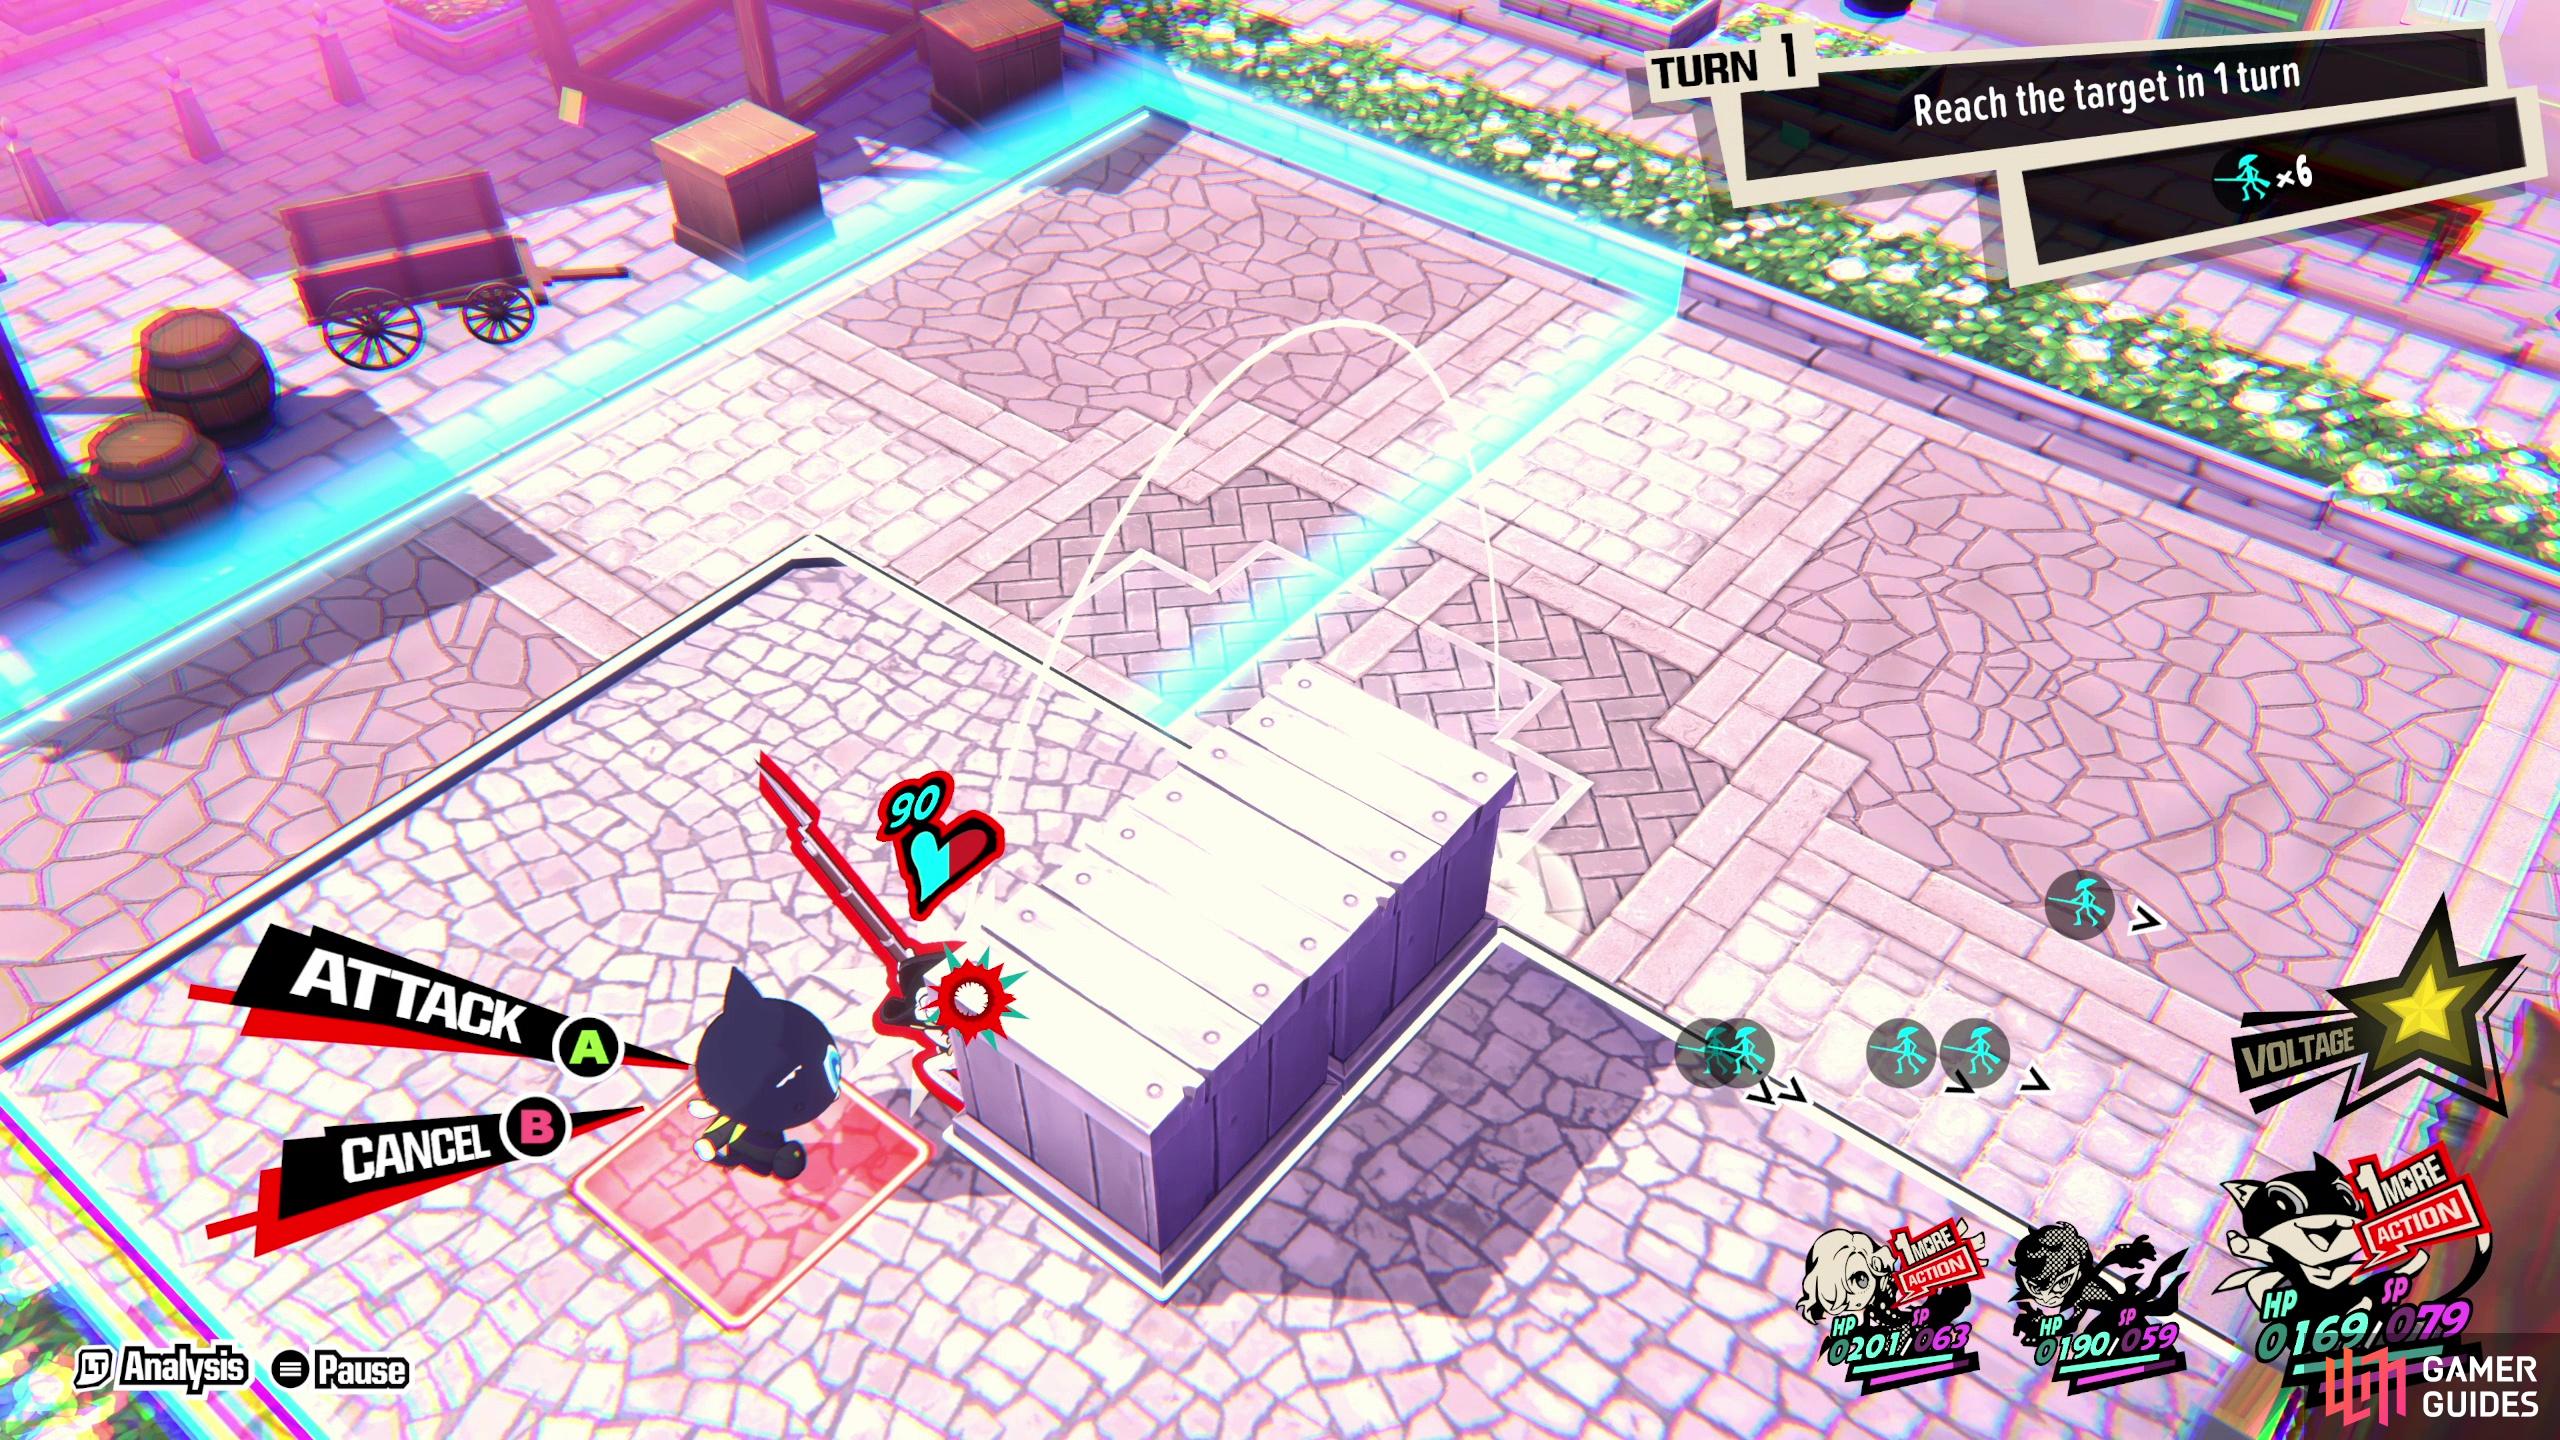 Use Morgana's extra turn to melee an enemy in cover, knocking him down.